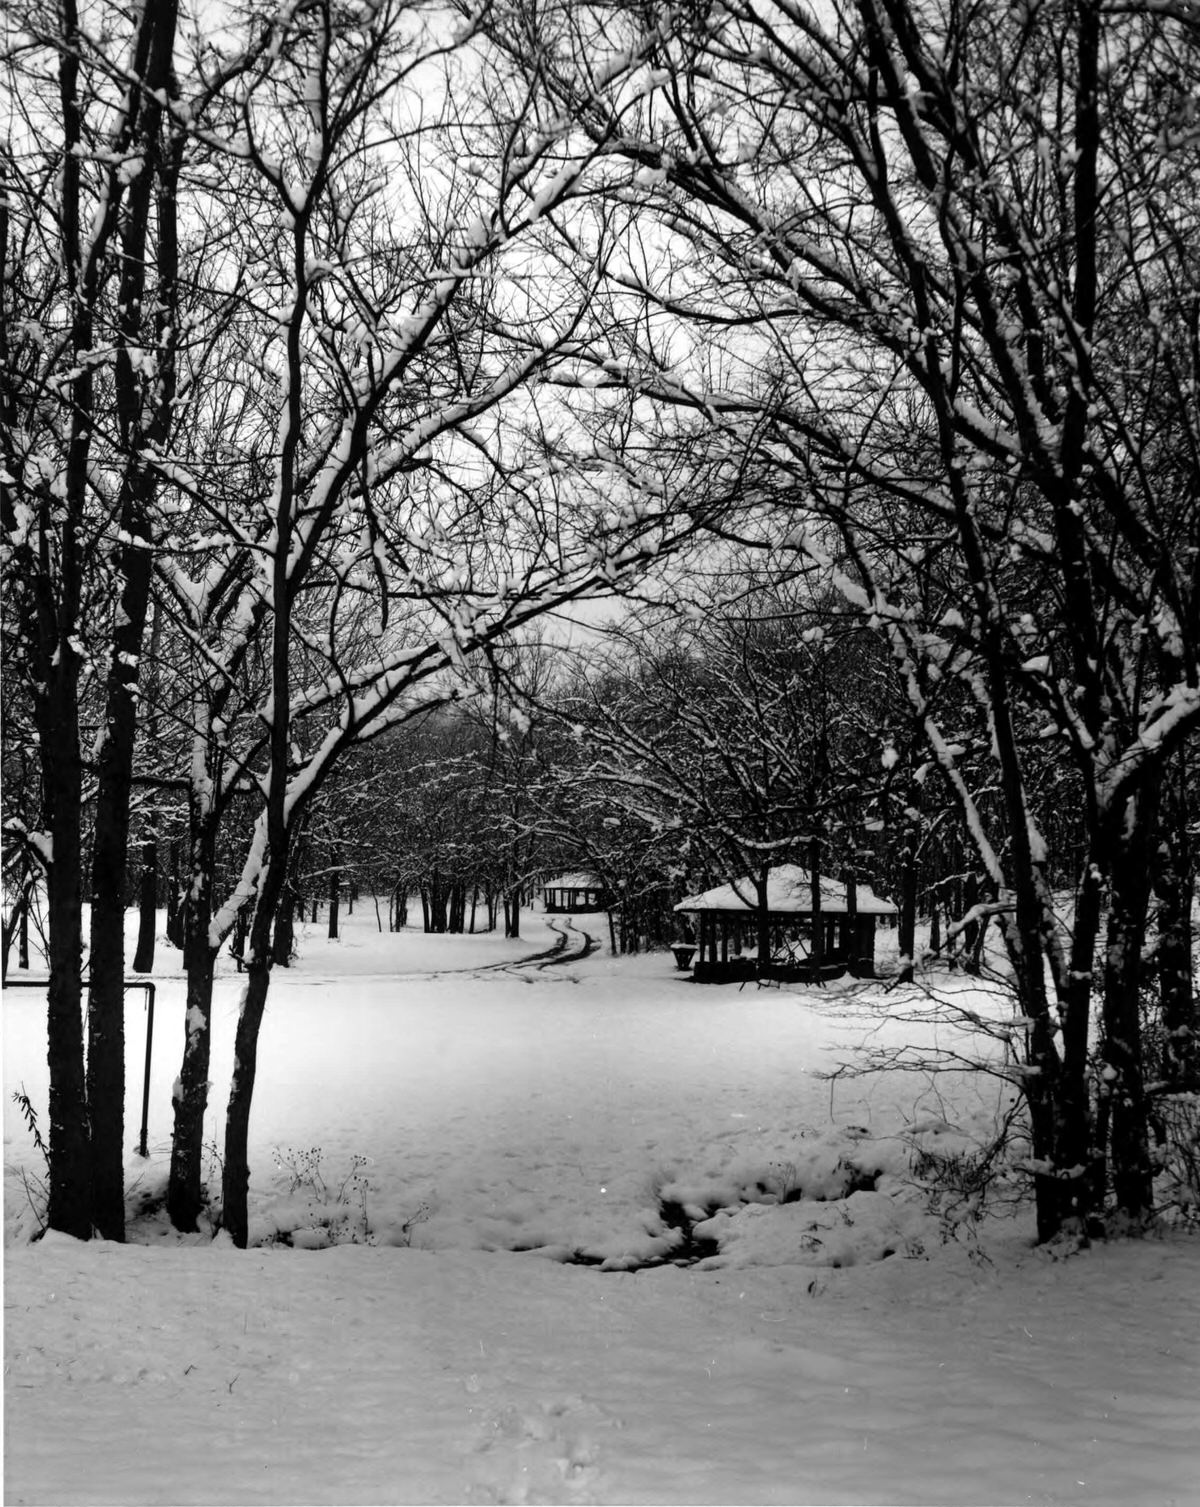 Percy Warner Park in Nashville, Tennessee after a snowfall, 1960